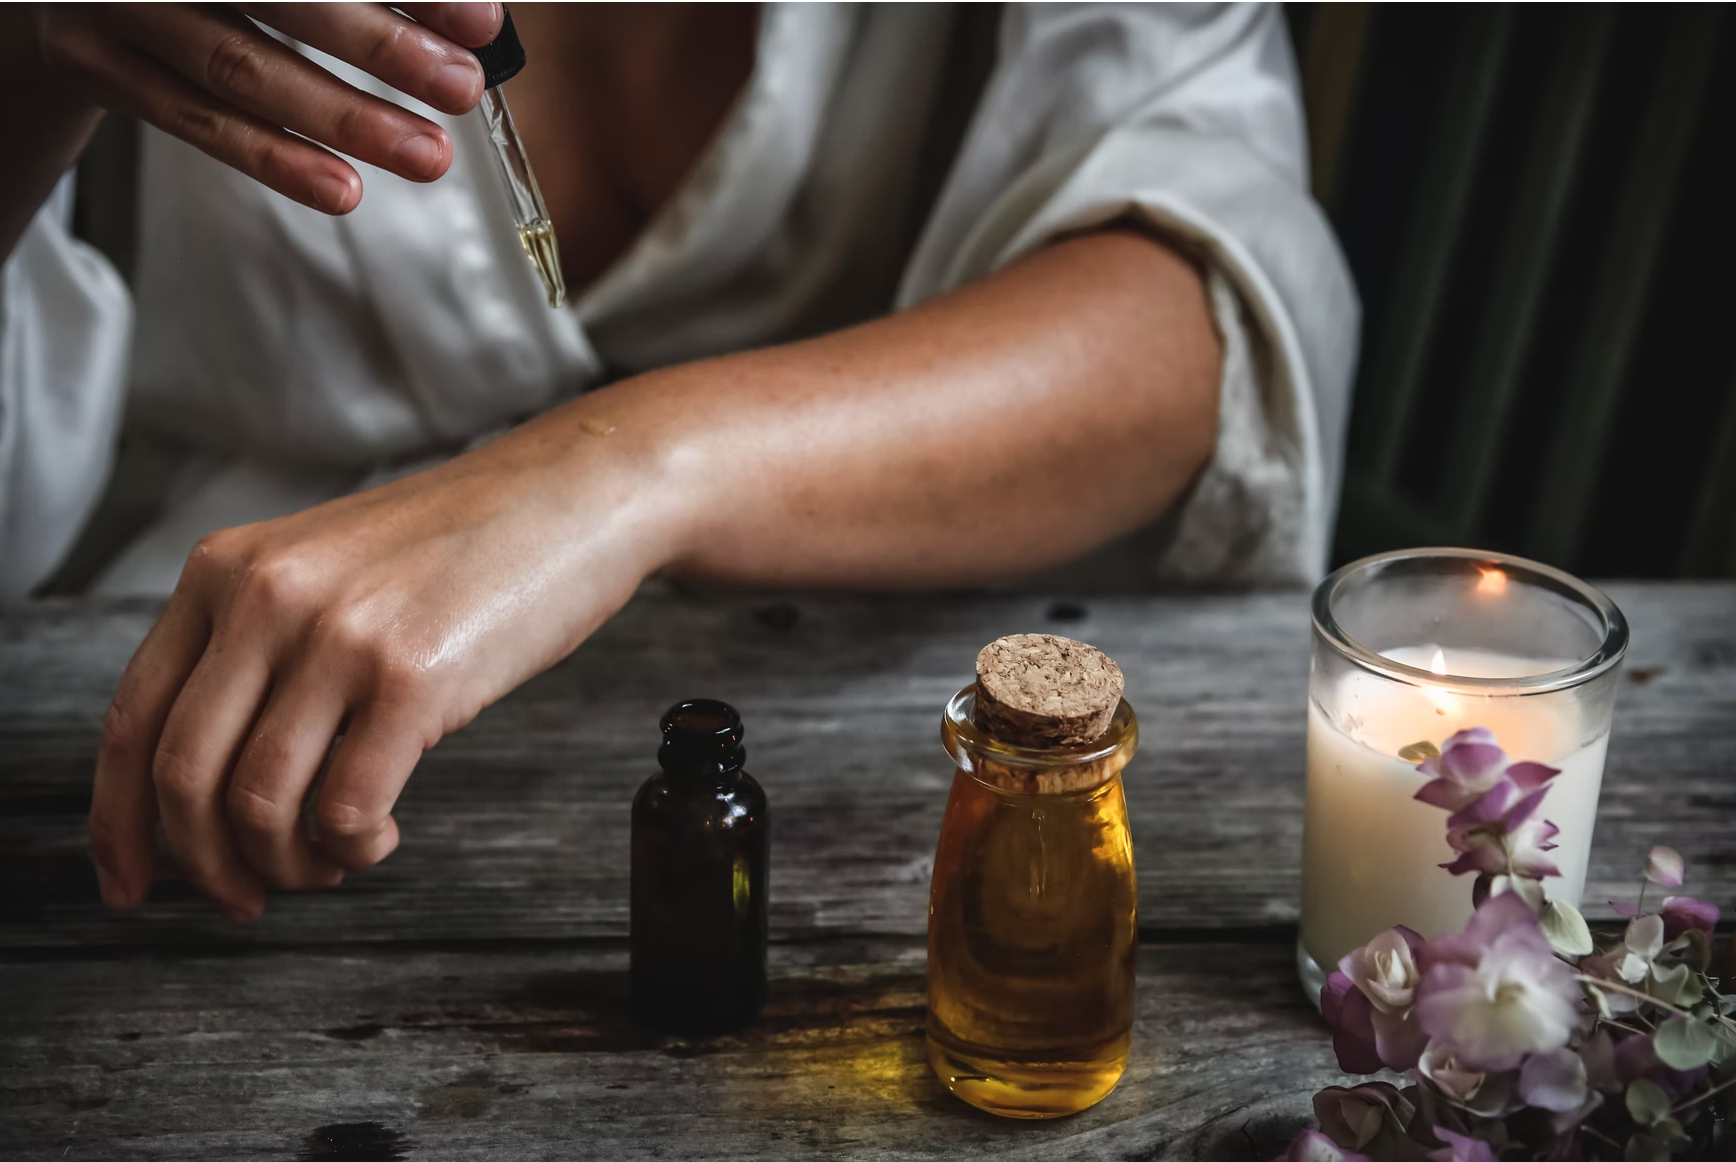 How much fragrance oils should I use